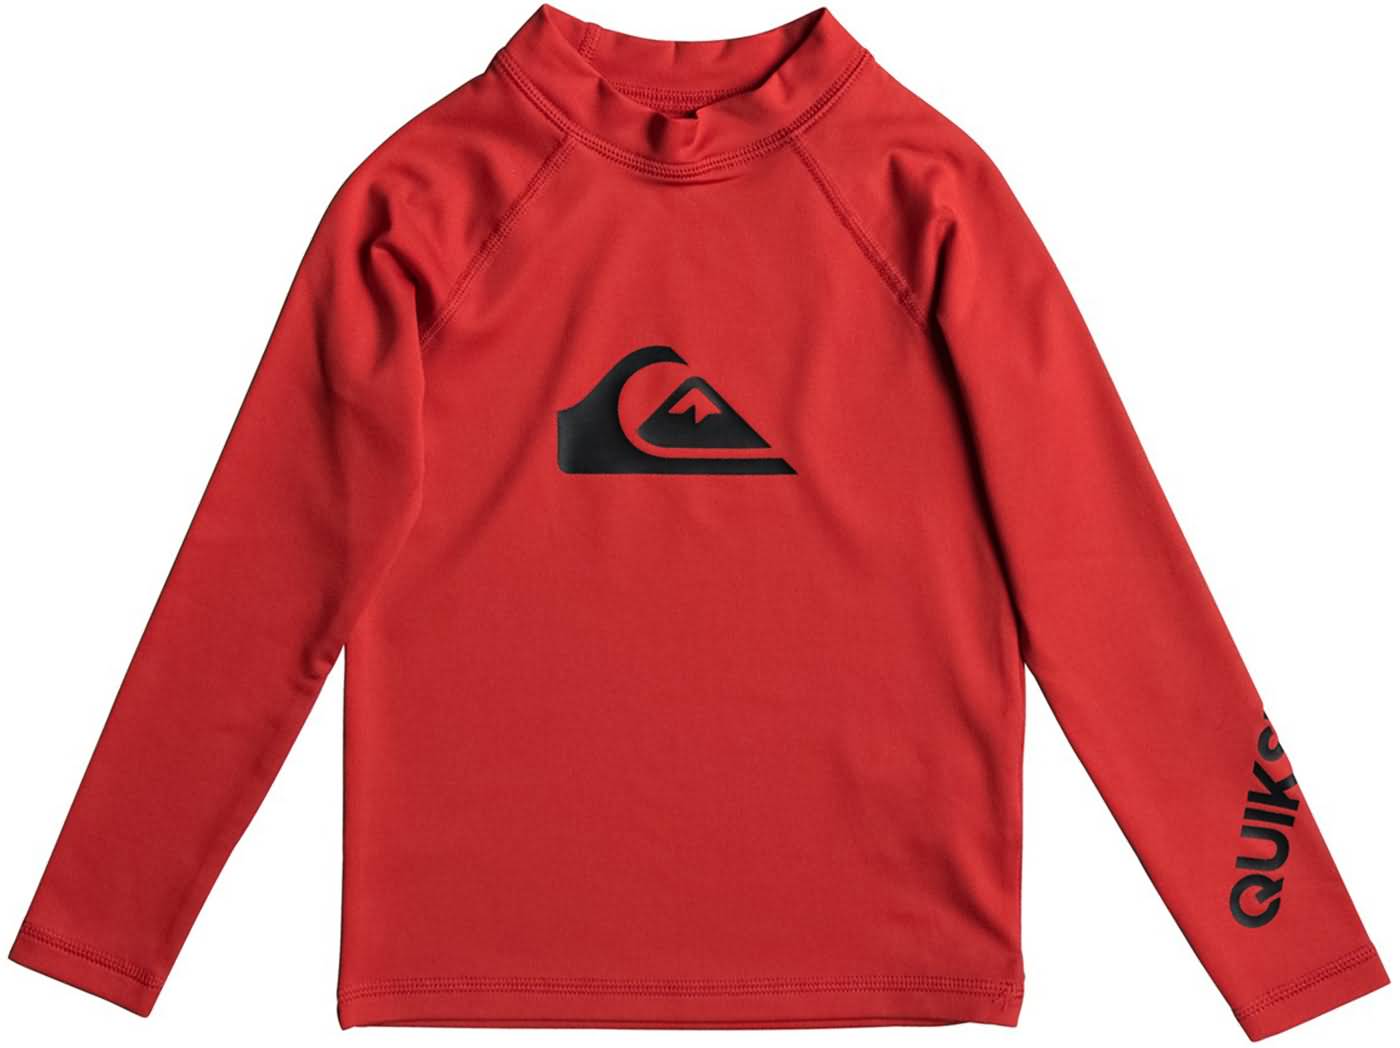 Quiksilver Fall 2017 Kids & Infant Beach Surfing Rashguards Preview